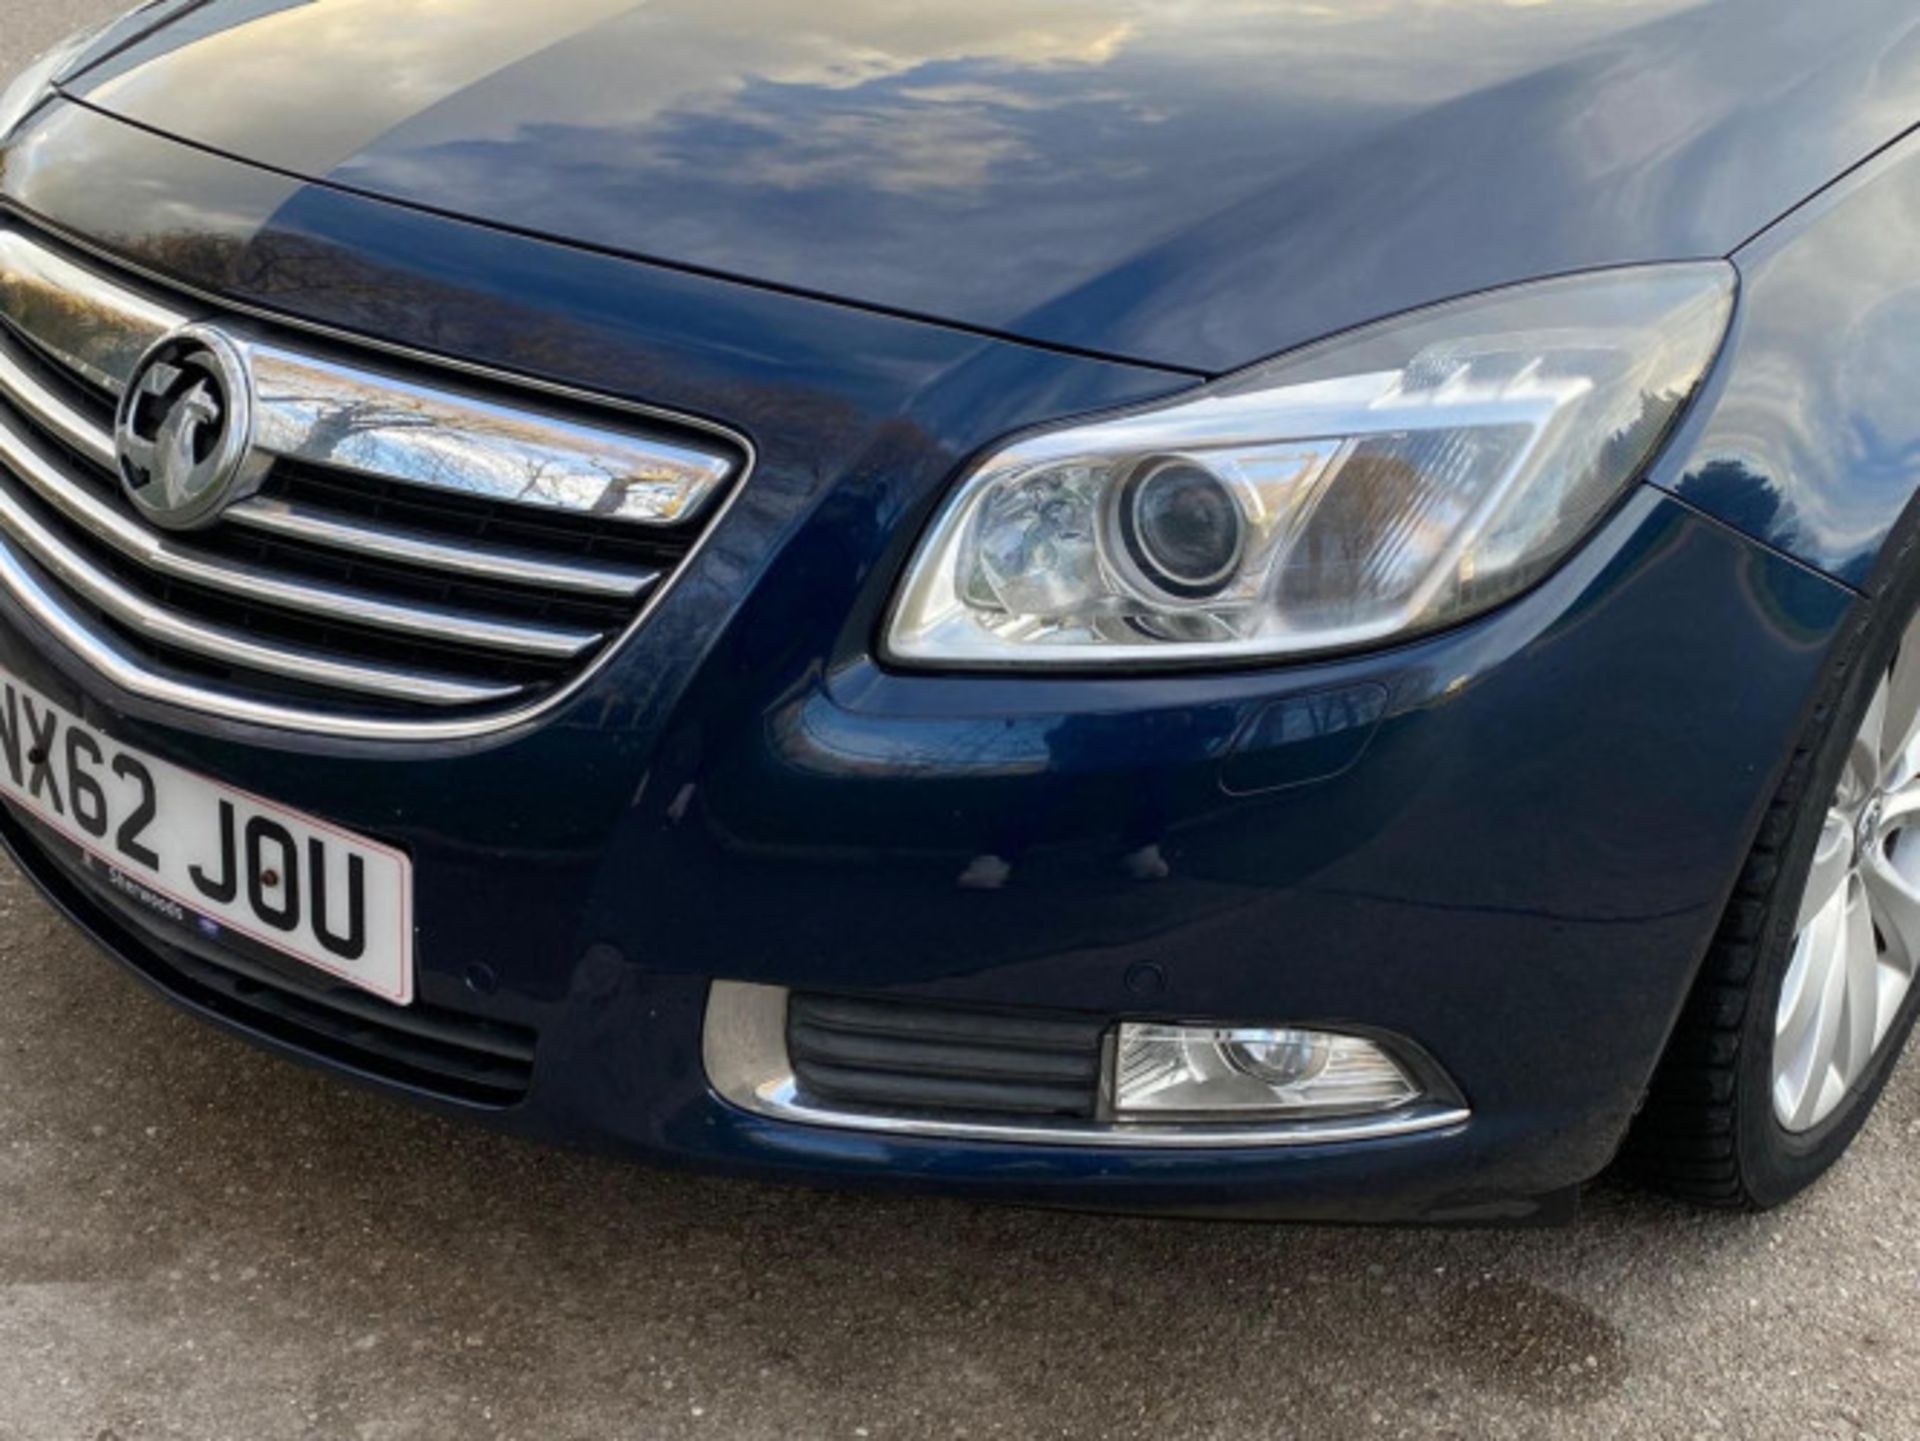 2012 VAUXHALL INSIGNIA 2.0 CDTI ELITE AUTO EURO 5 - DISCOVER EXCELLENCE >>--NO VAT ON HAMMER--<< - Image 68 of 79